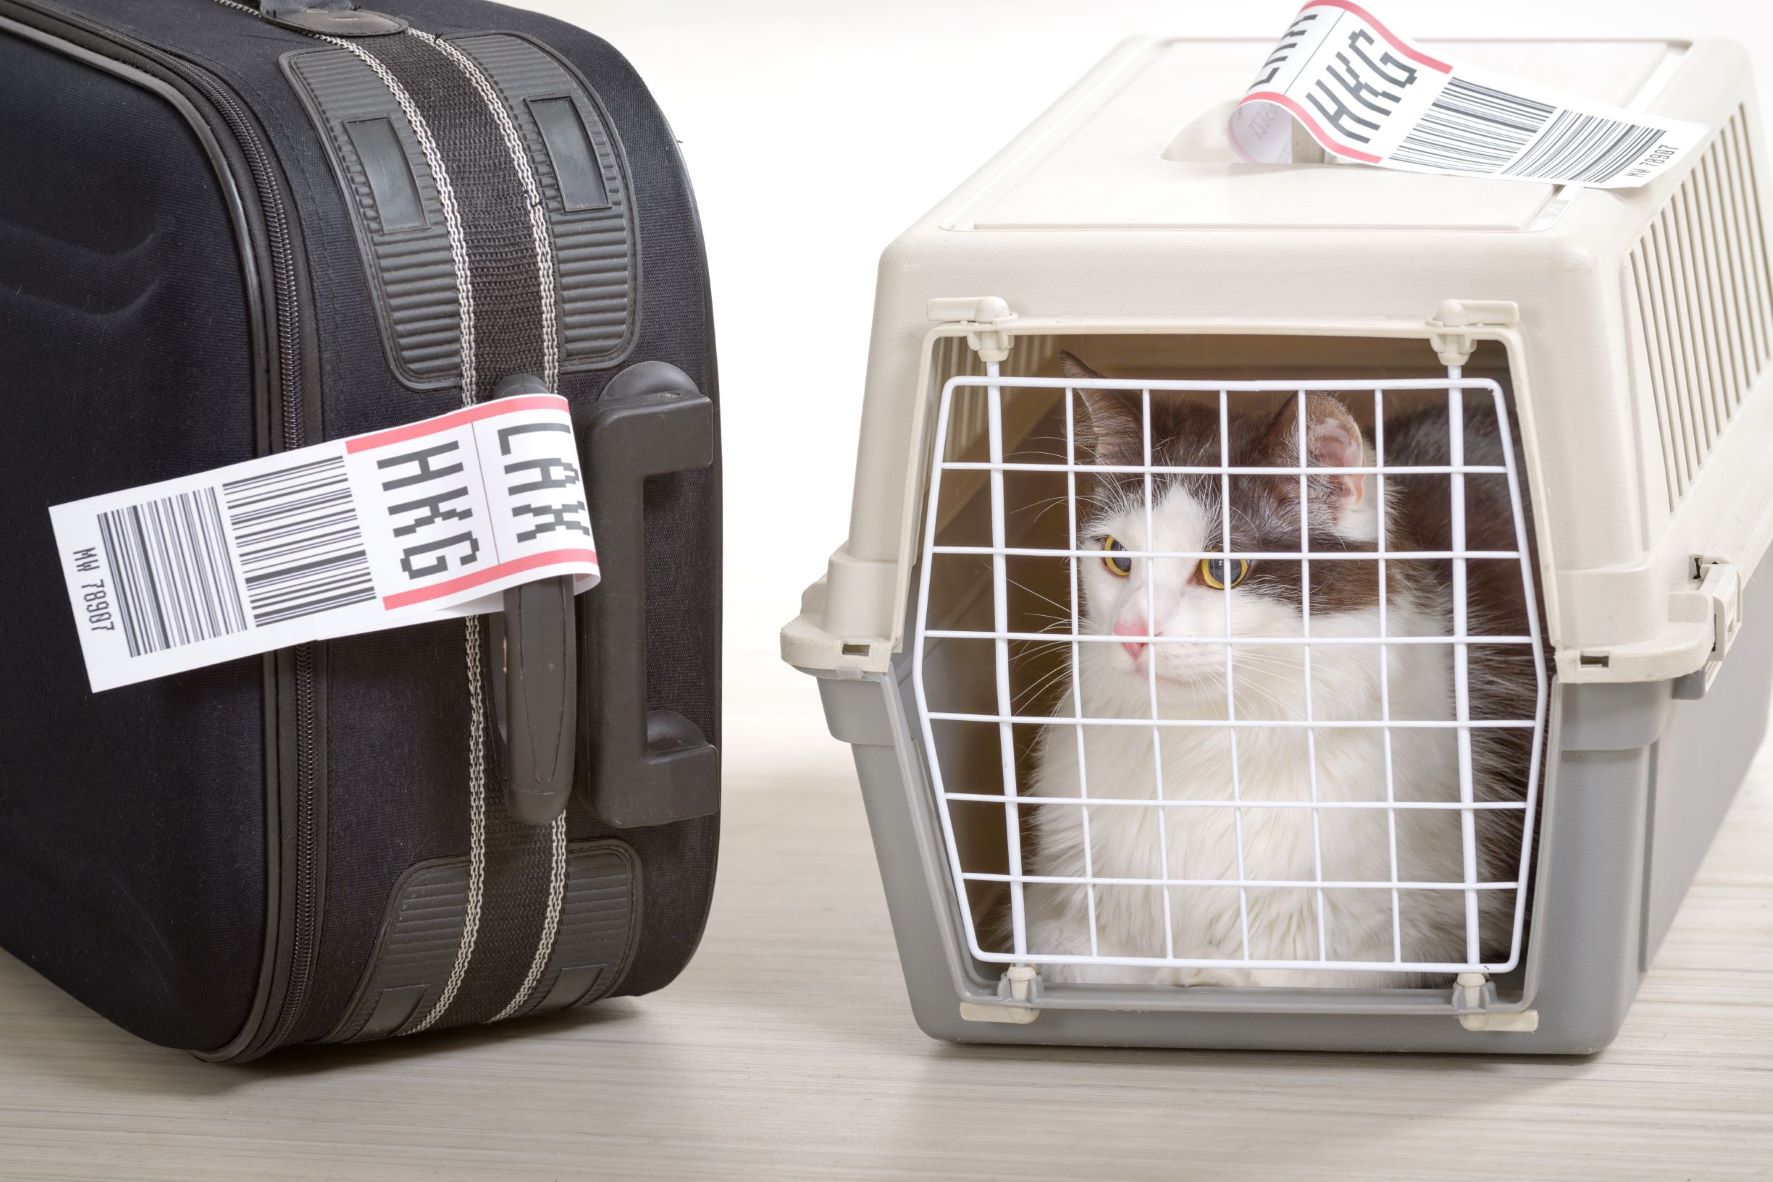 Cat inside pet transporter next to luggage with airport tags